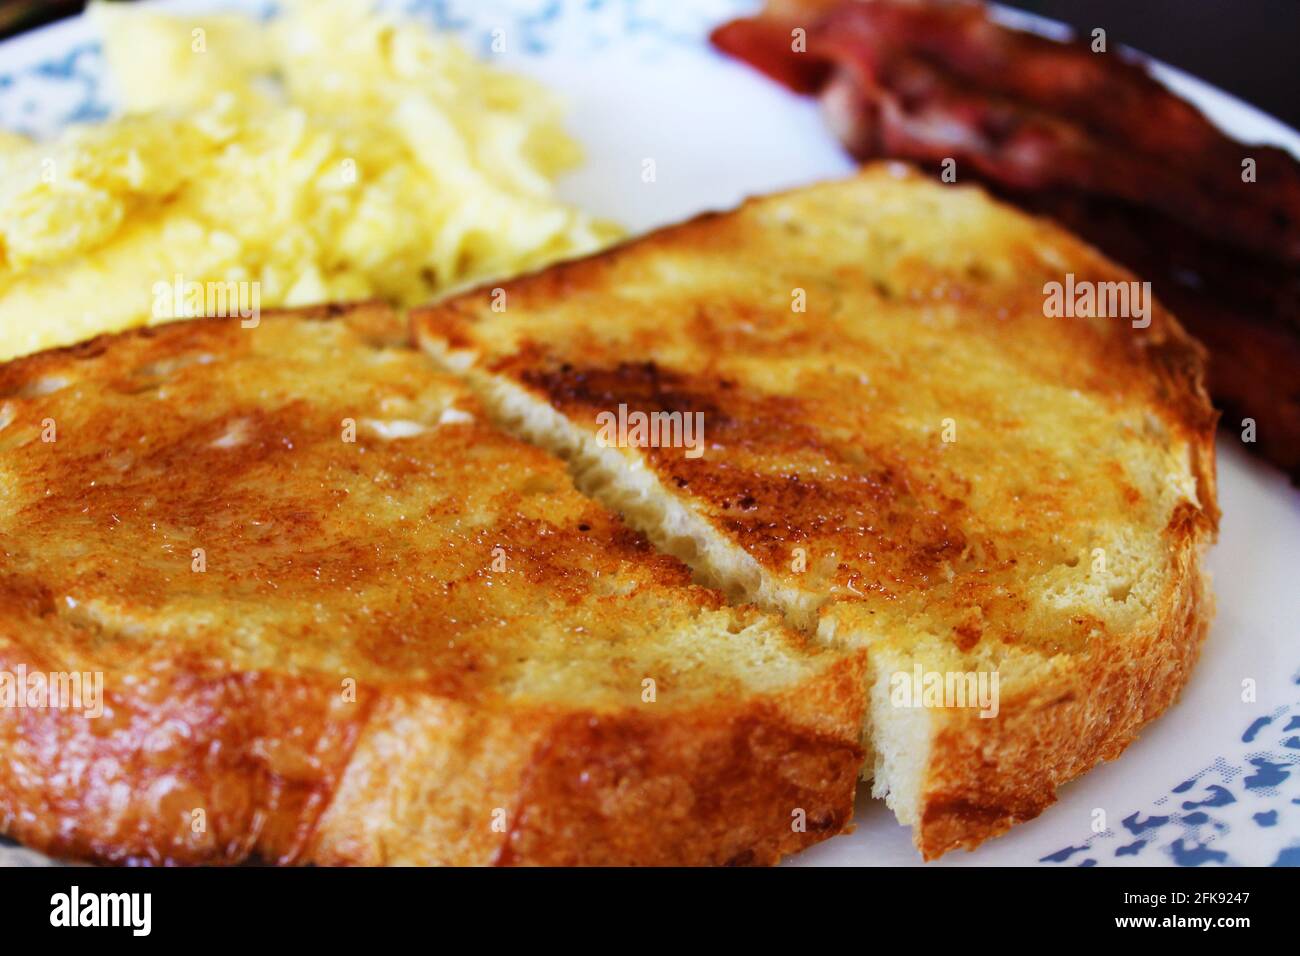 Close-up of a slice of toast on a plate, bacon and scrambled eggs out of focus in the background. Stock Photo